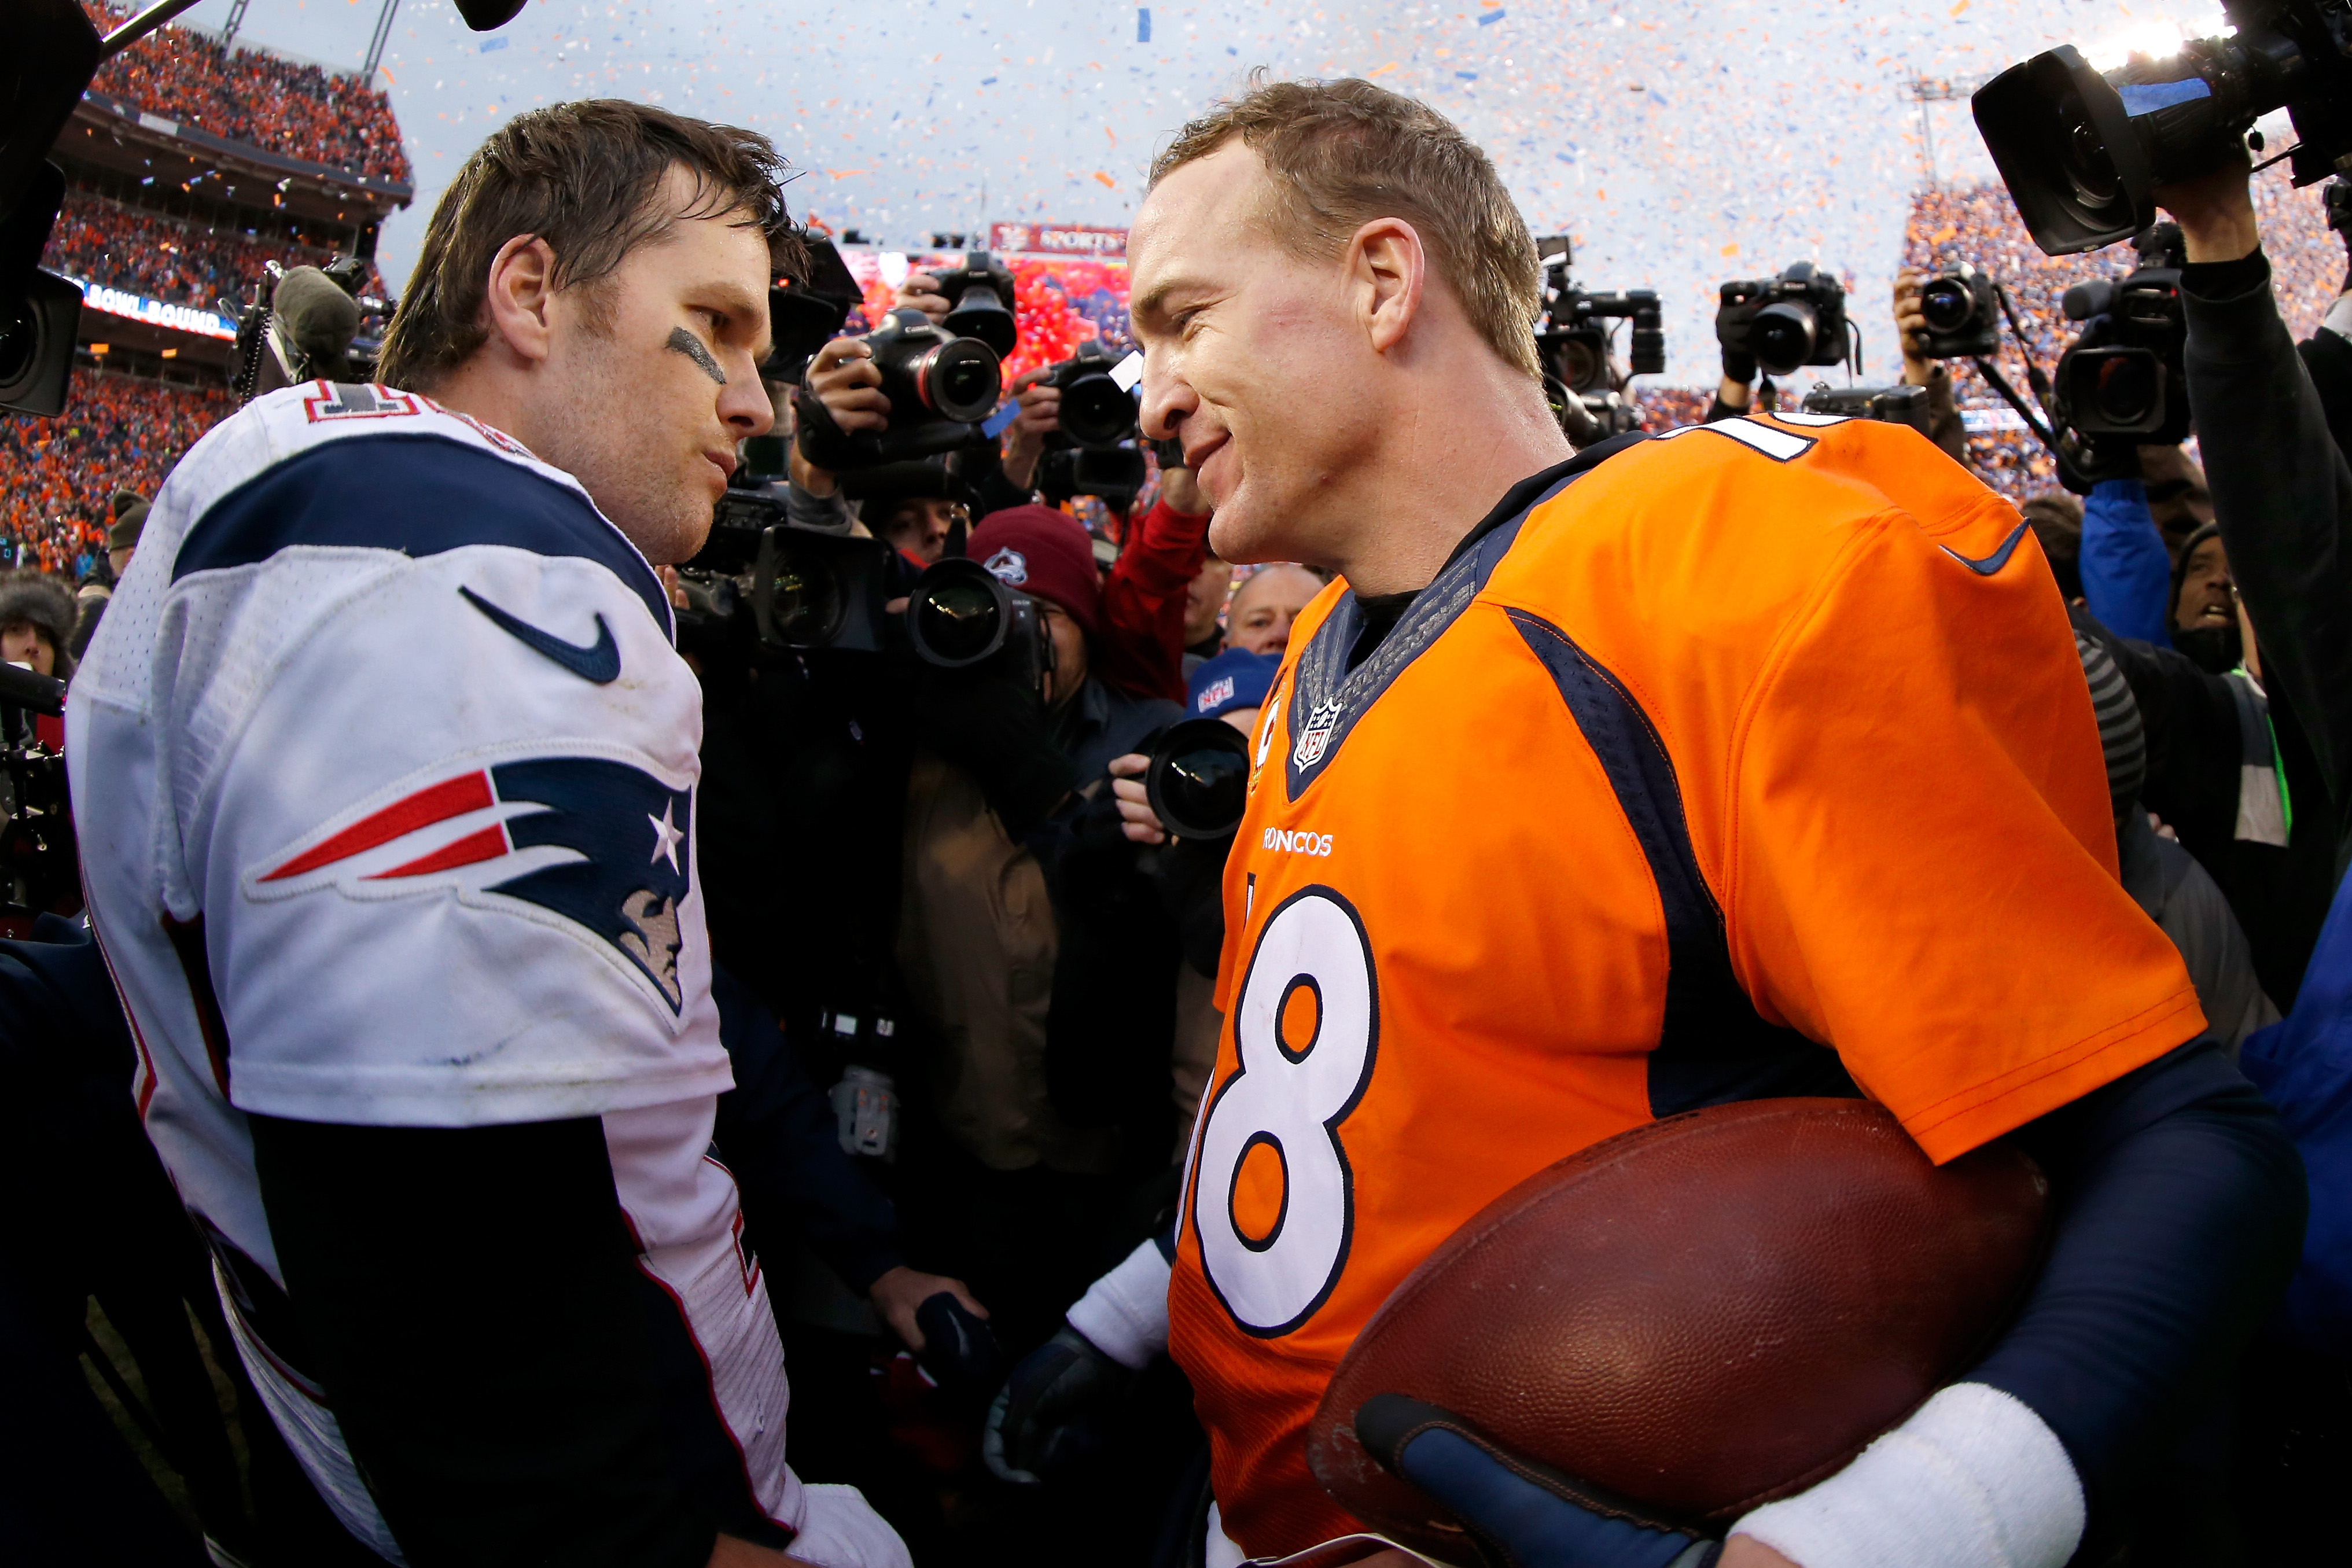 Peyton Manning and Tom Brady may be the greatest NFL quarterbacks of this century, but one unlikely QB has them both beat in career earnings.